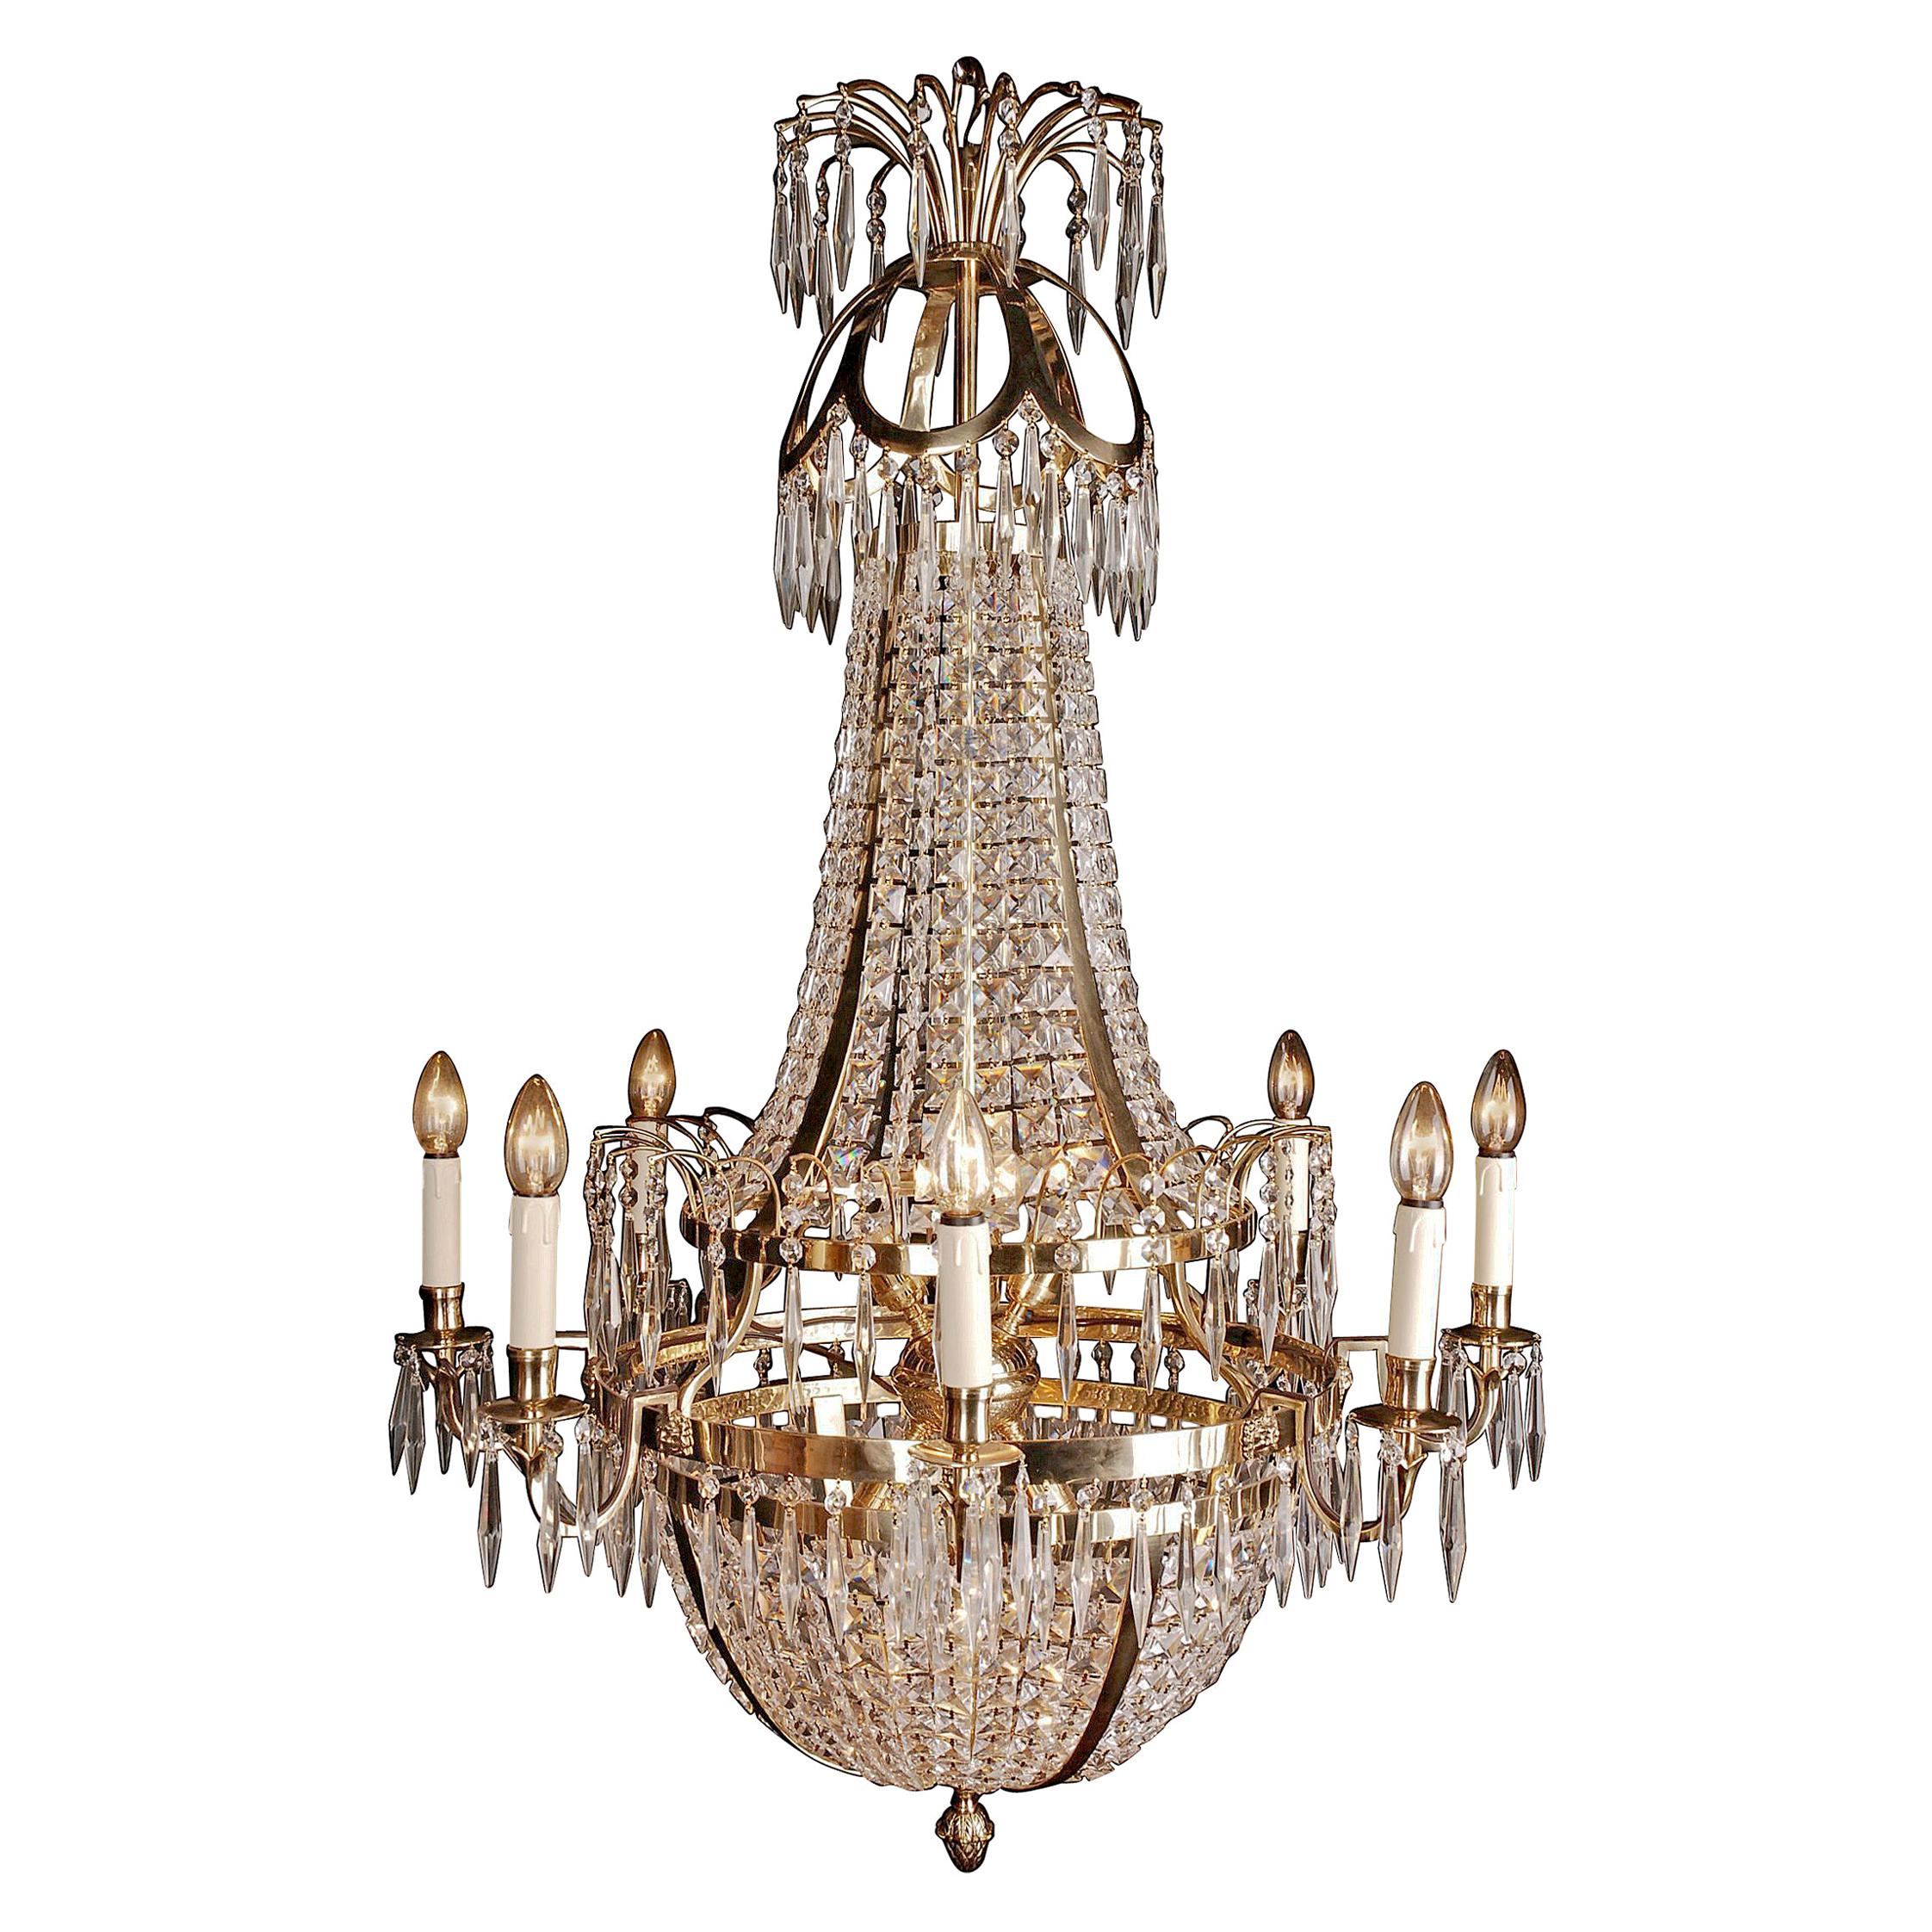 20th Century Classicist Style Swedish Empire Ceiling Candelabra Chandelier For Sale